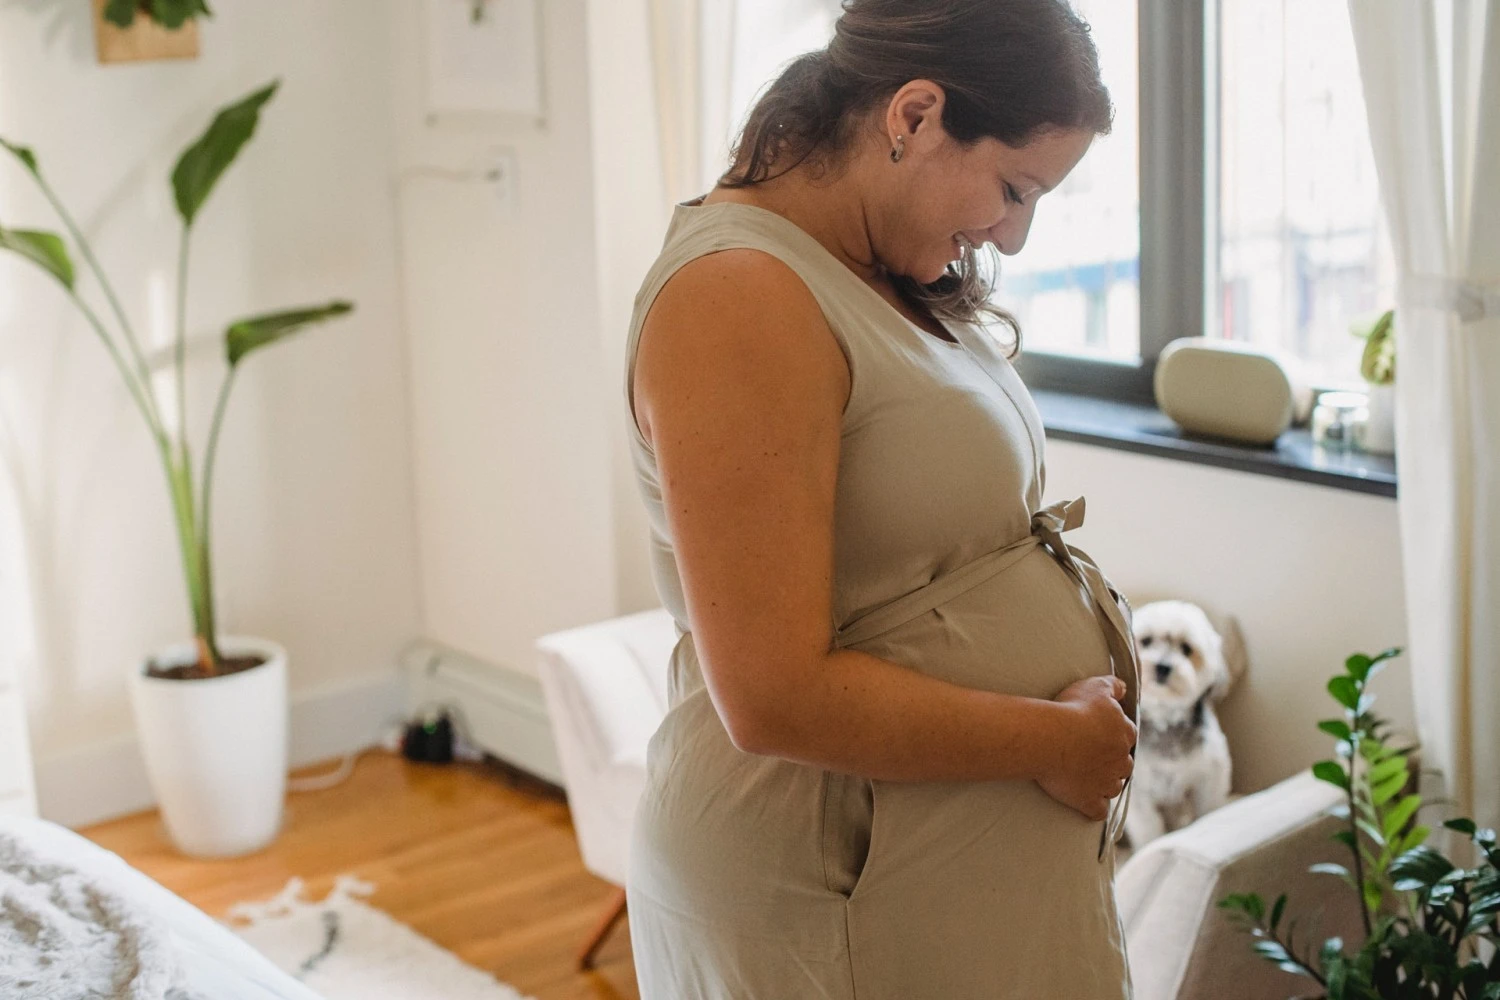 Safety Tips For Moving While Pregnant